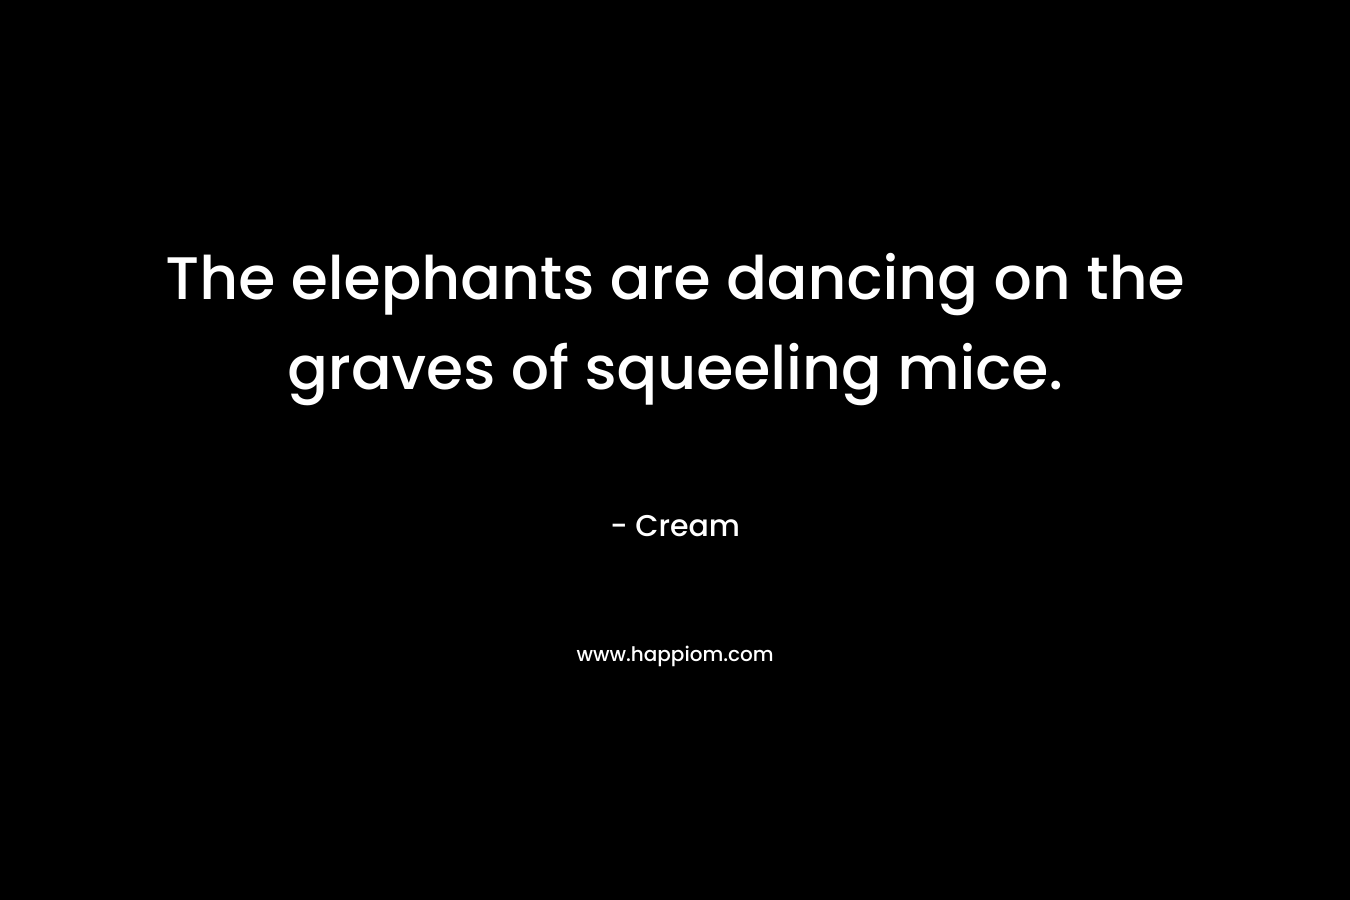 The elephants are dancing on the graves of squeeling mice. – Cream